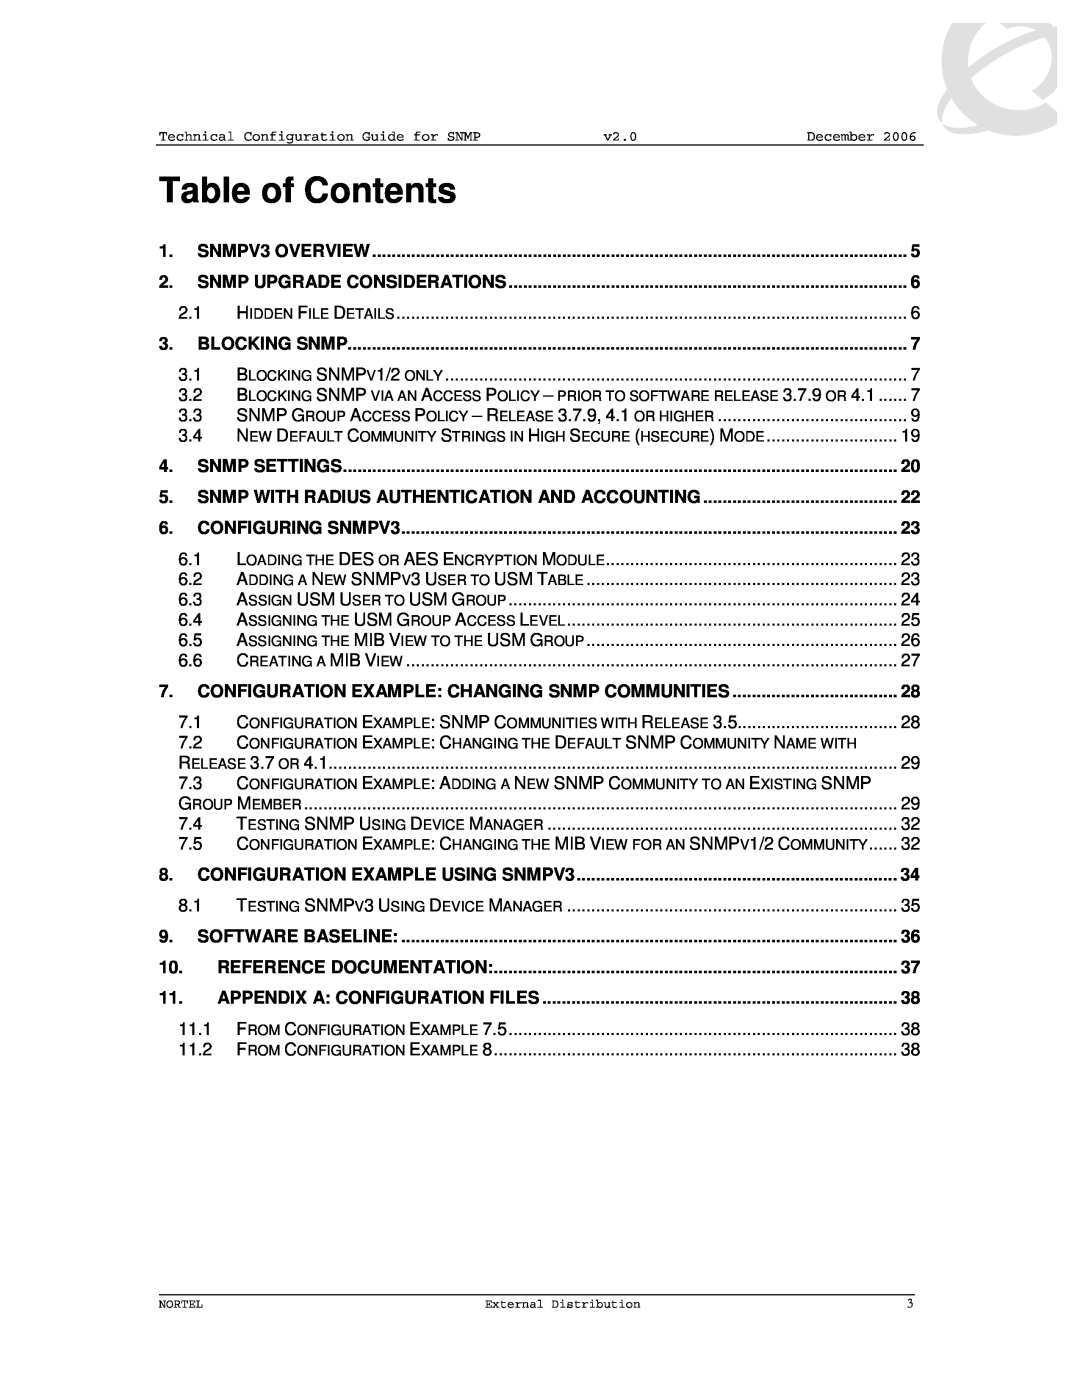 Nortel Networks 8600 Table of Contents, Snmp With Radius Authentication And Accounting, CONFIGURATION EXAMPLE USING SNMPV3 